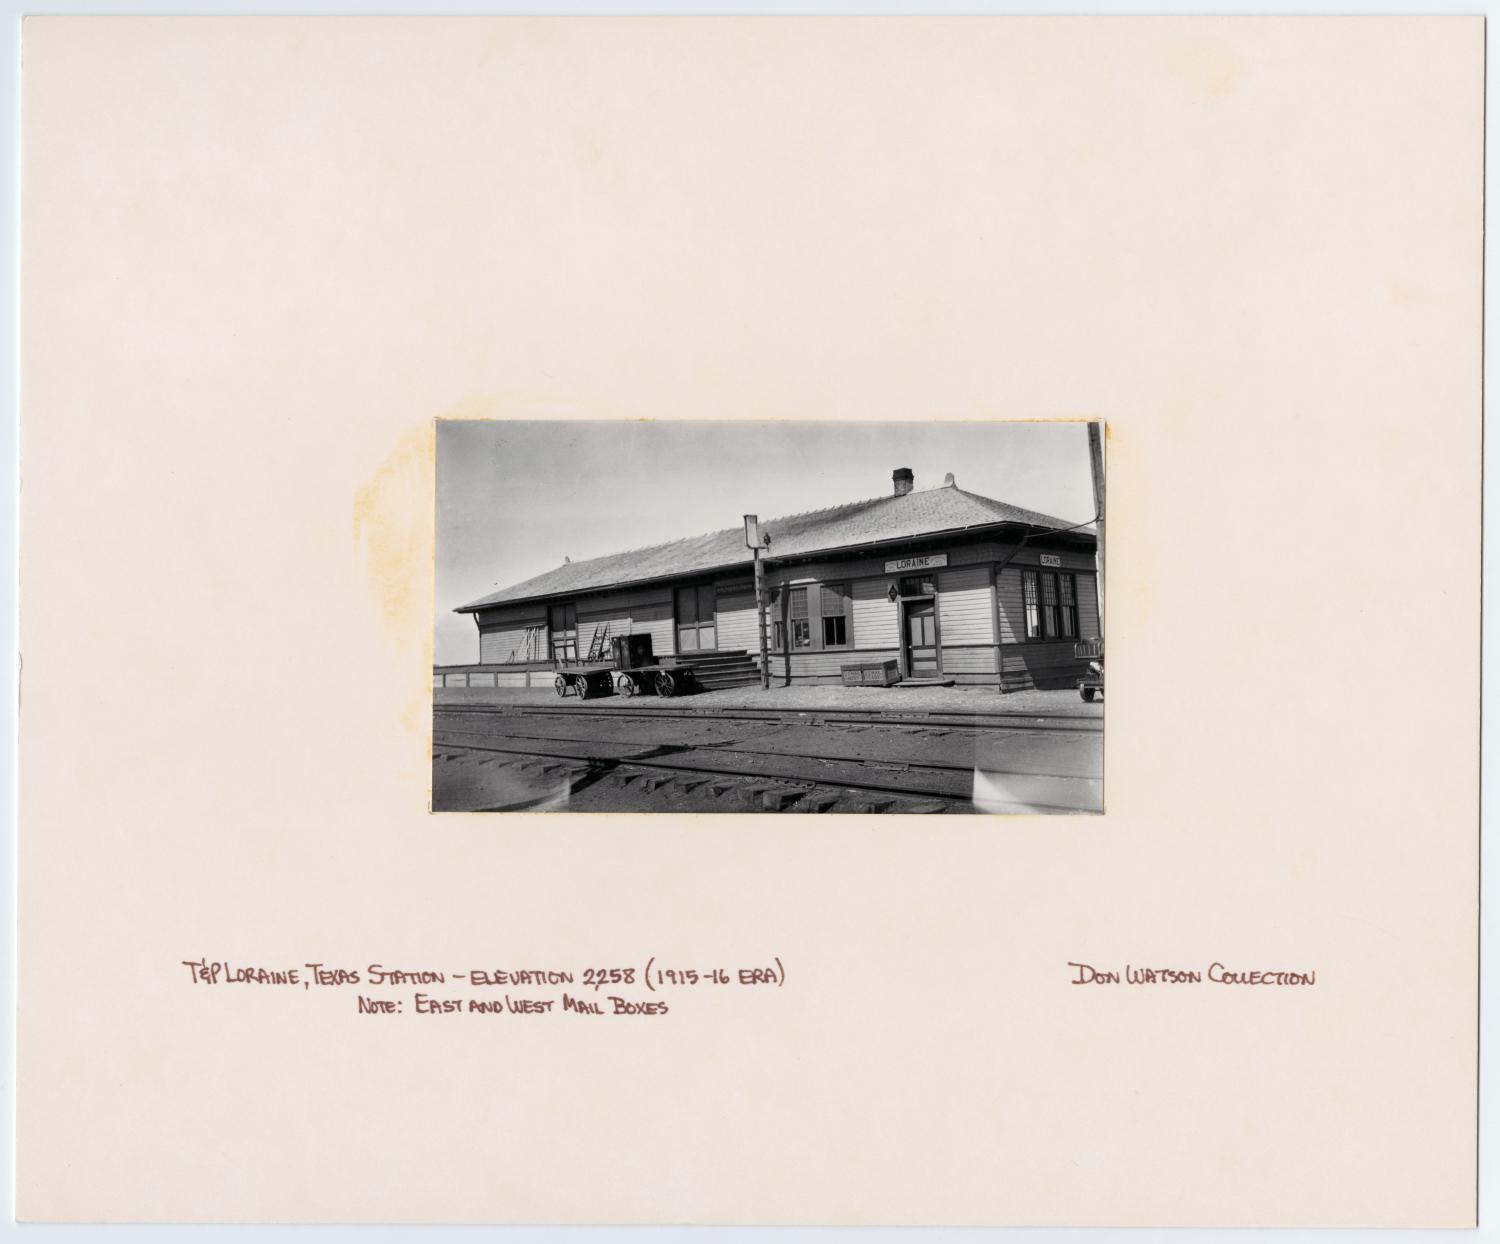 Images of Texas & Pacific Stations and Structures in  Loraine, TX